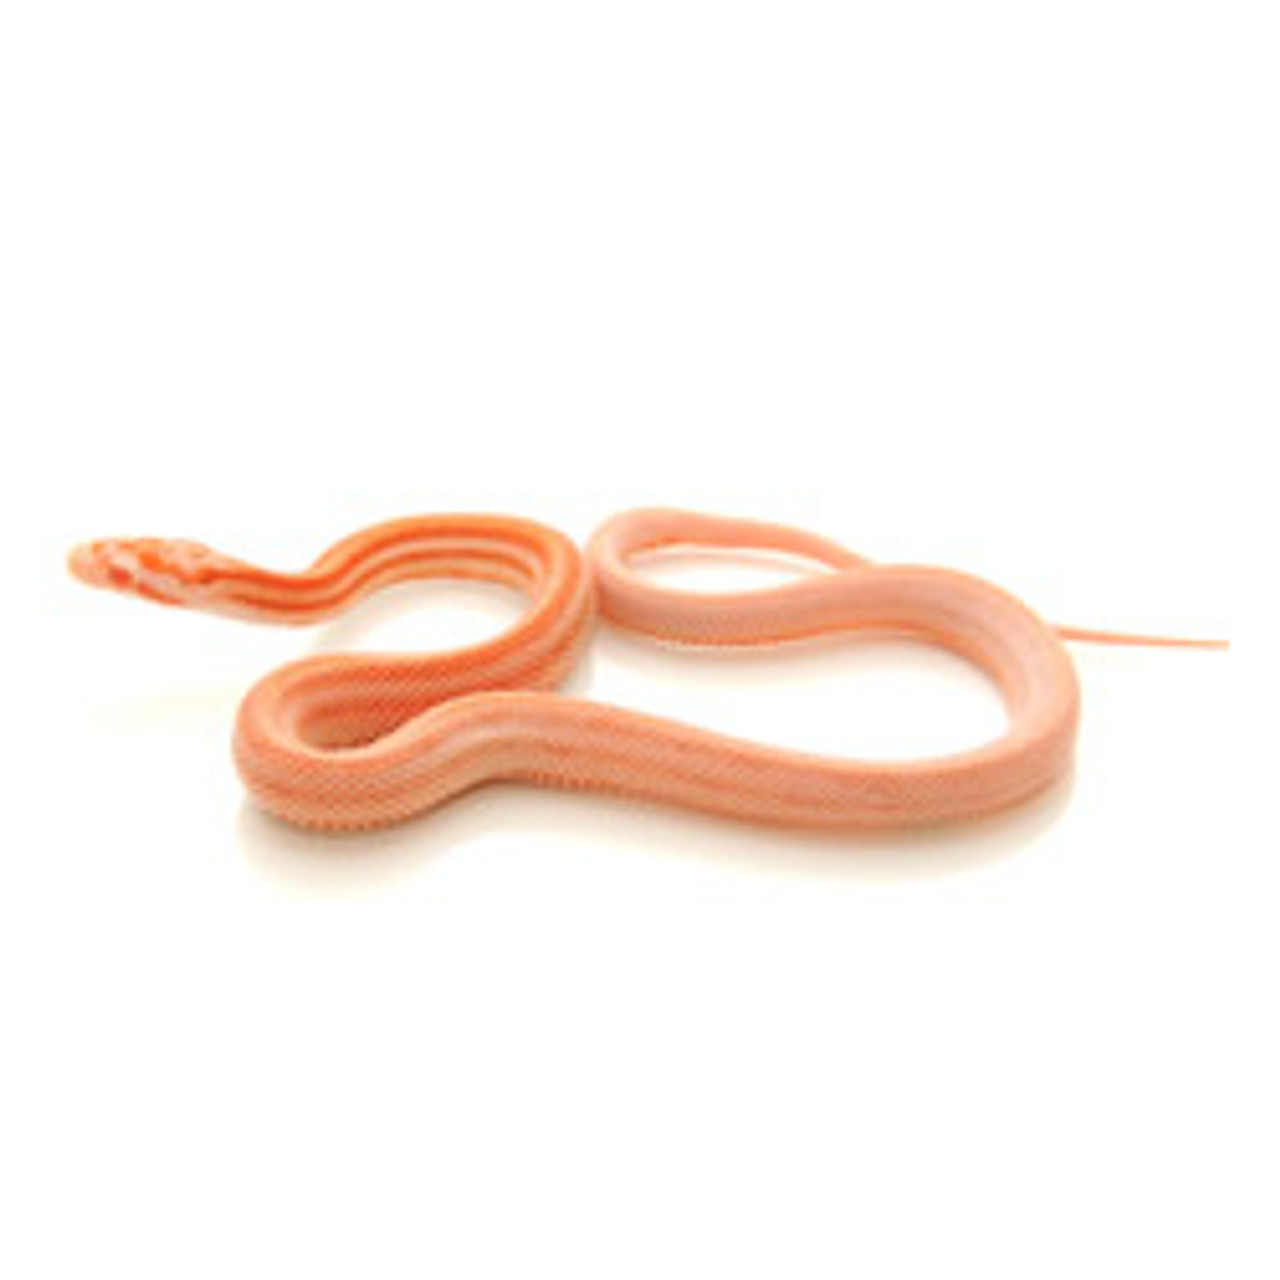 Creamcicle Striped Corn Snake (Pantherophis guttata)